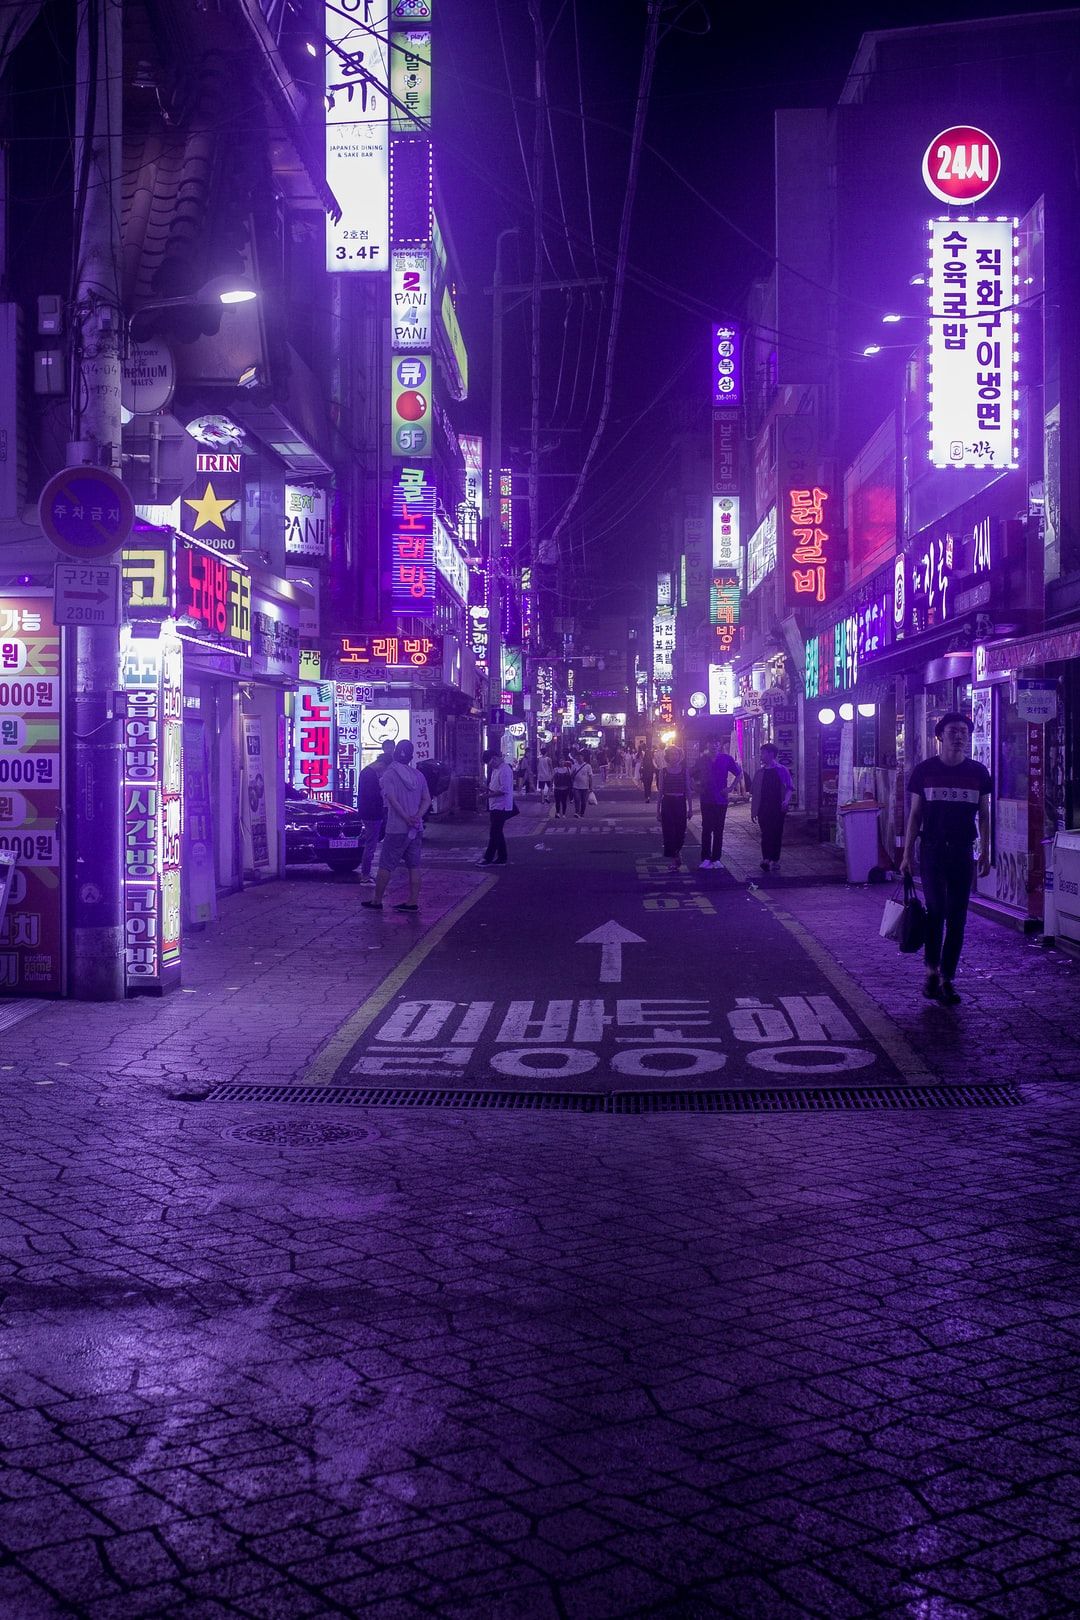 See The Best 34 Free High Resolution Photo Of Seoul Best Free Seoul, Neon, Light And City Photo On Unspla. Neon Wallpaper, Neon Background, City Wallpaper